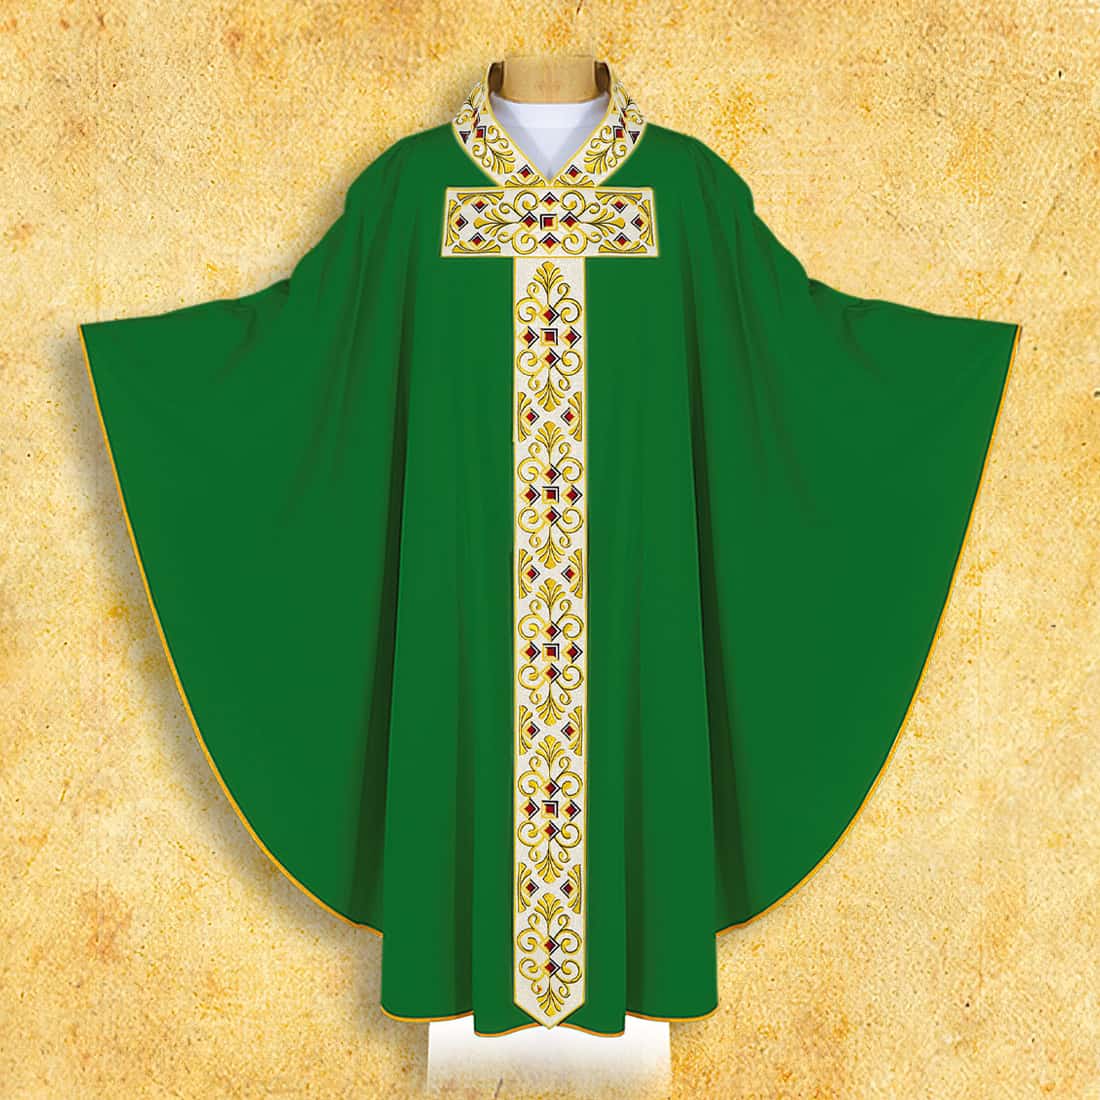 Embroidered chasuble "TE DEUM"